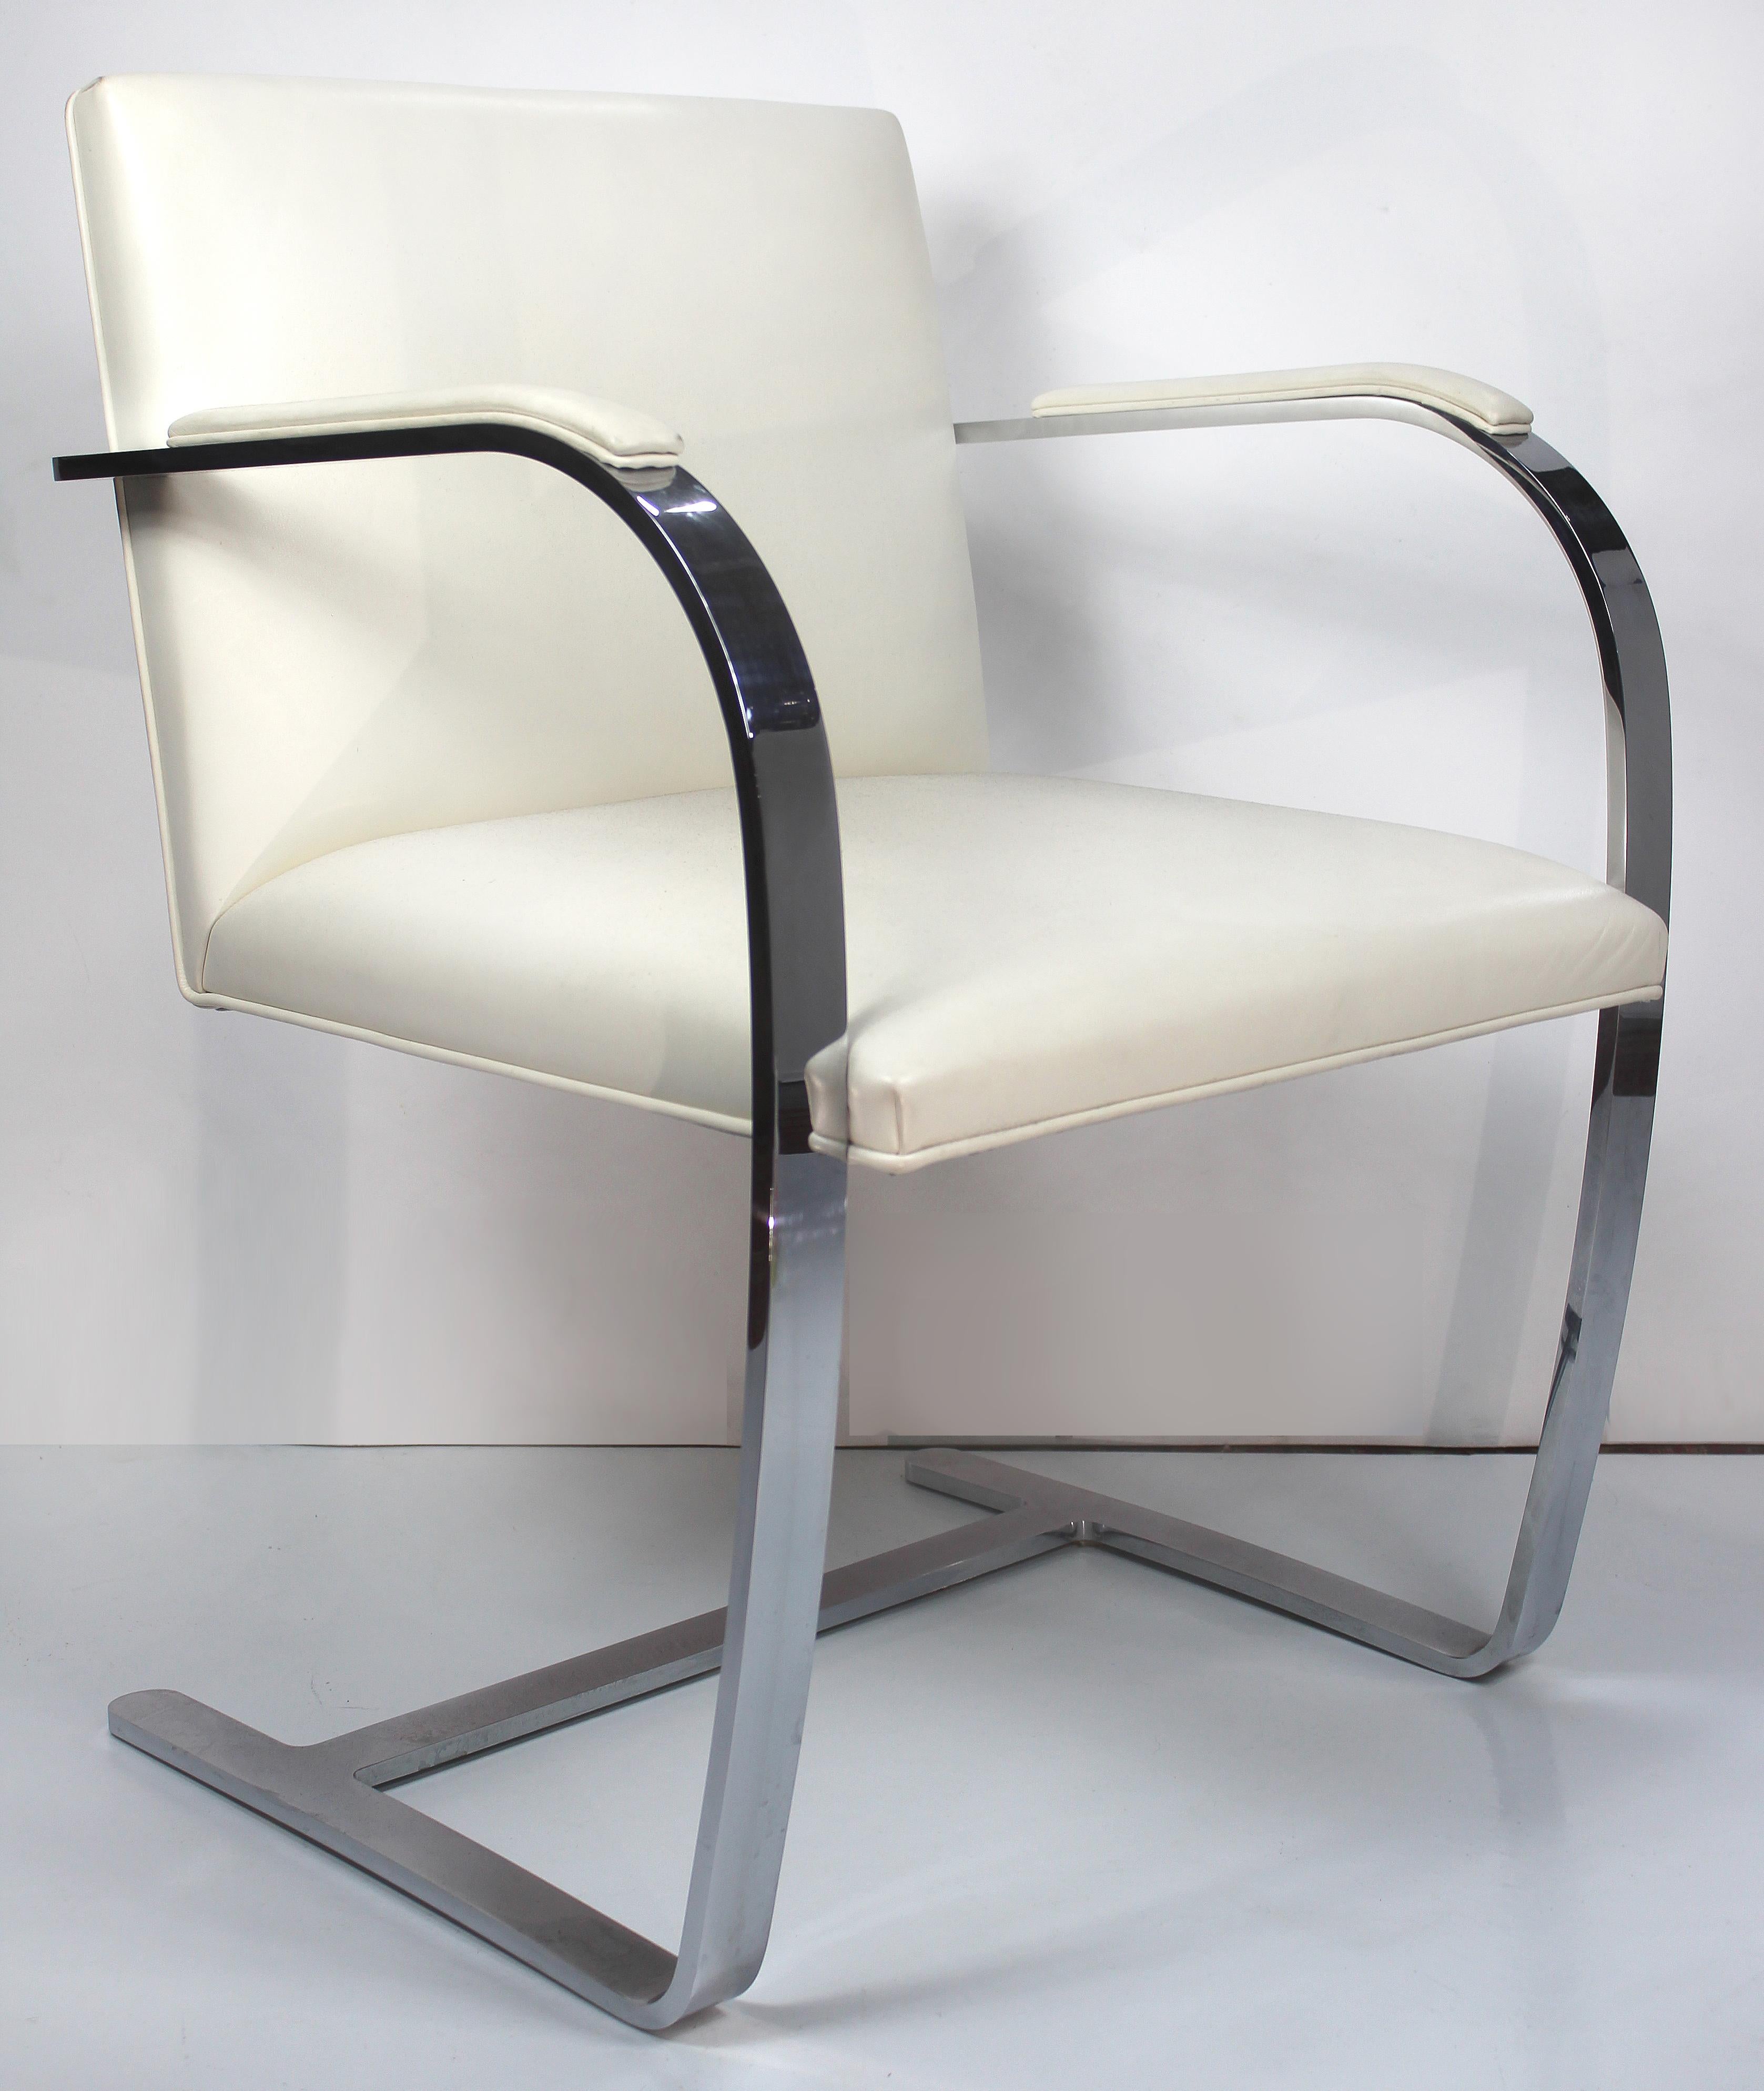 Contemporary Mies Van Der Rohe, Knoll Flat Bar Brno Chairs, Eggshell White Leather, Set of 4